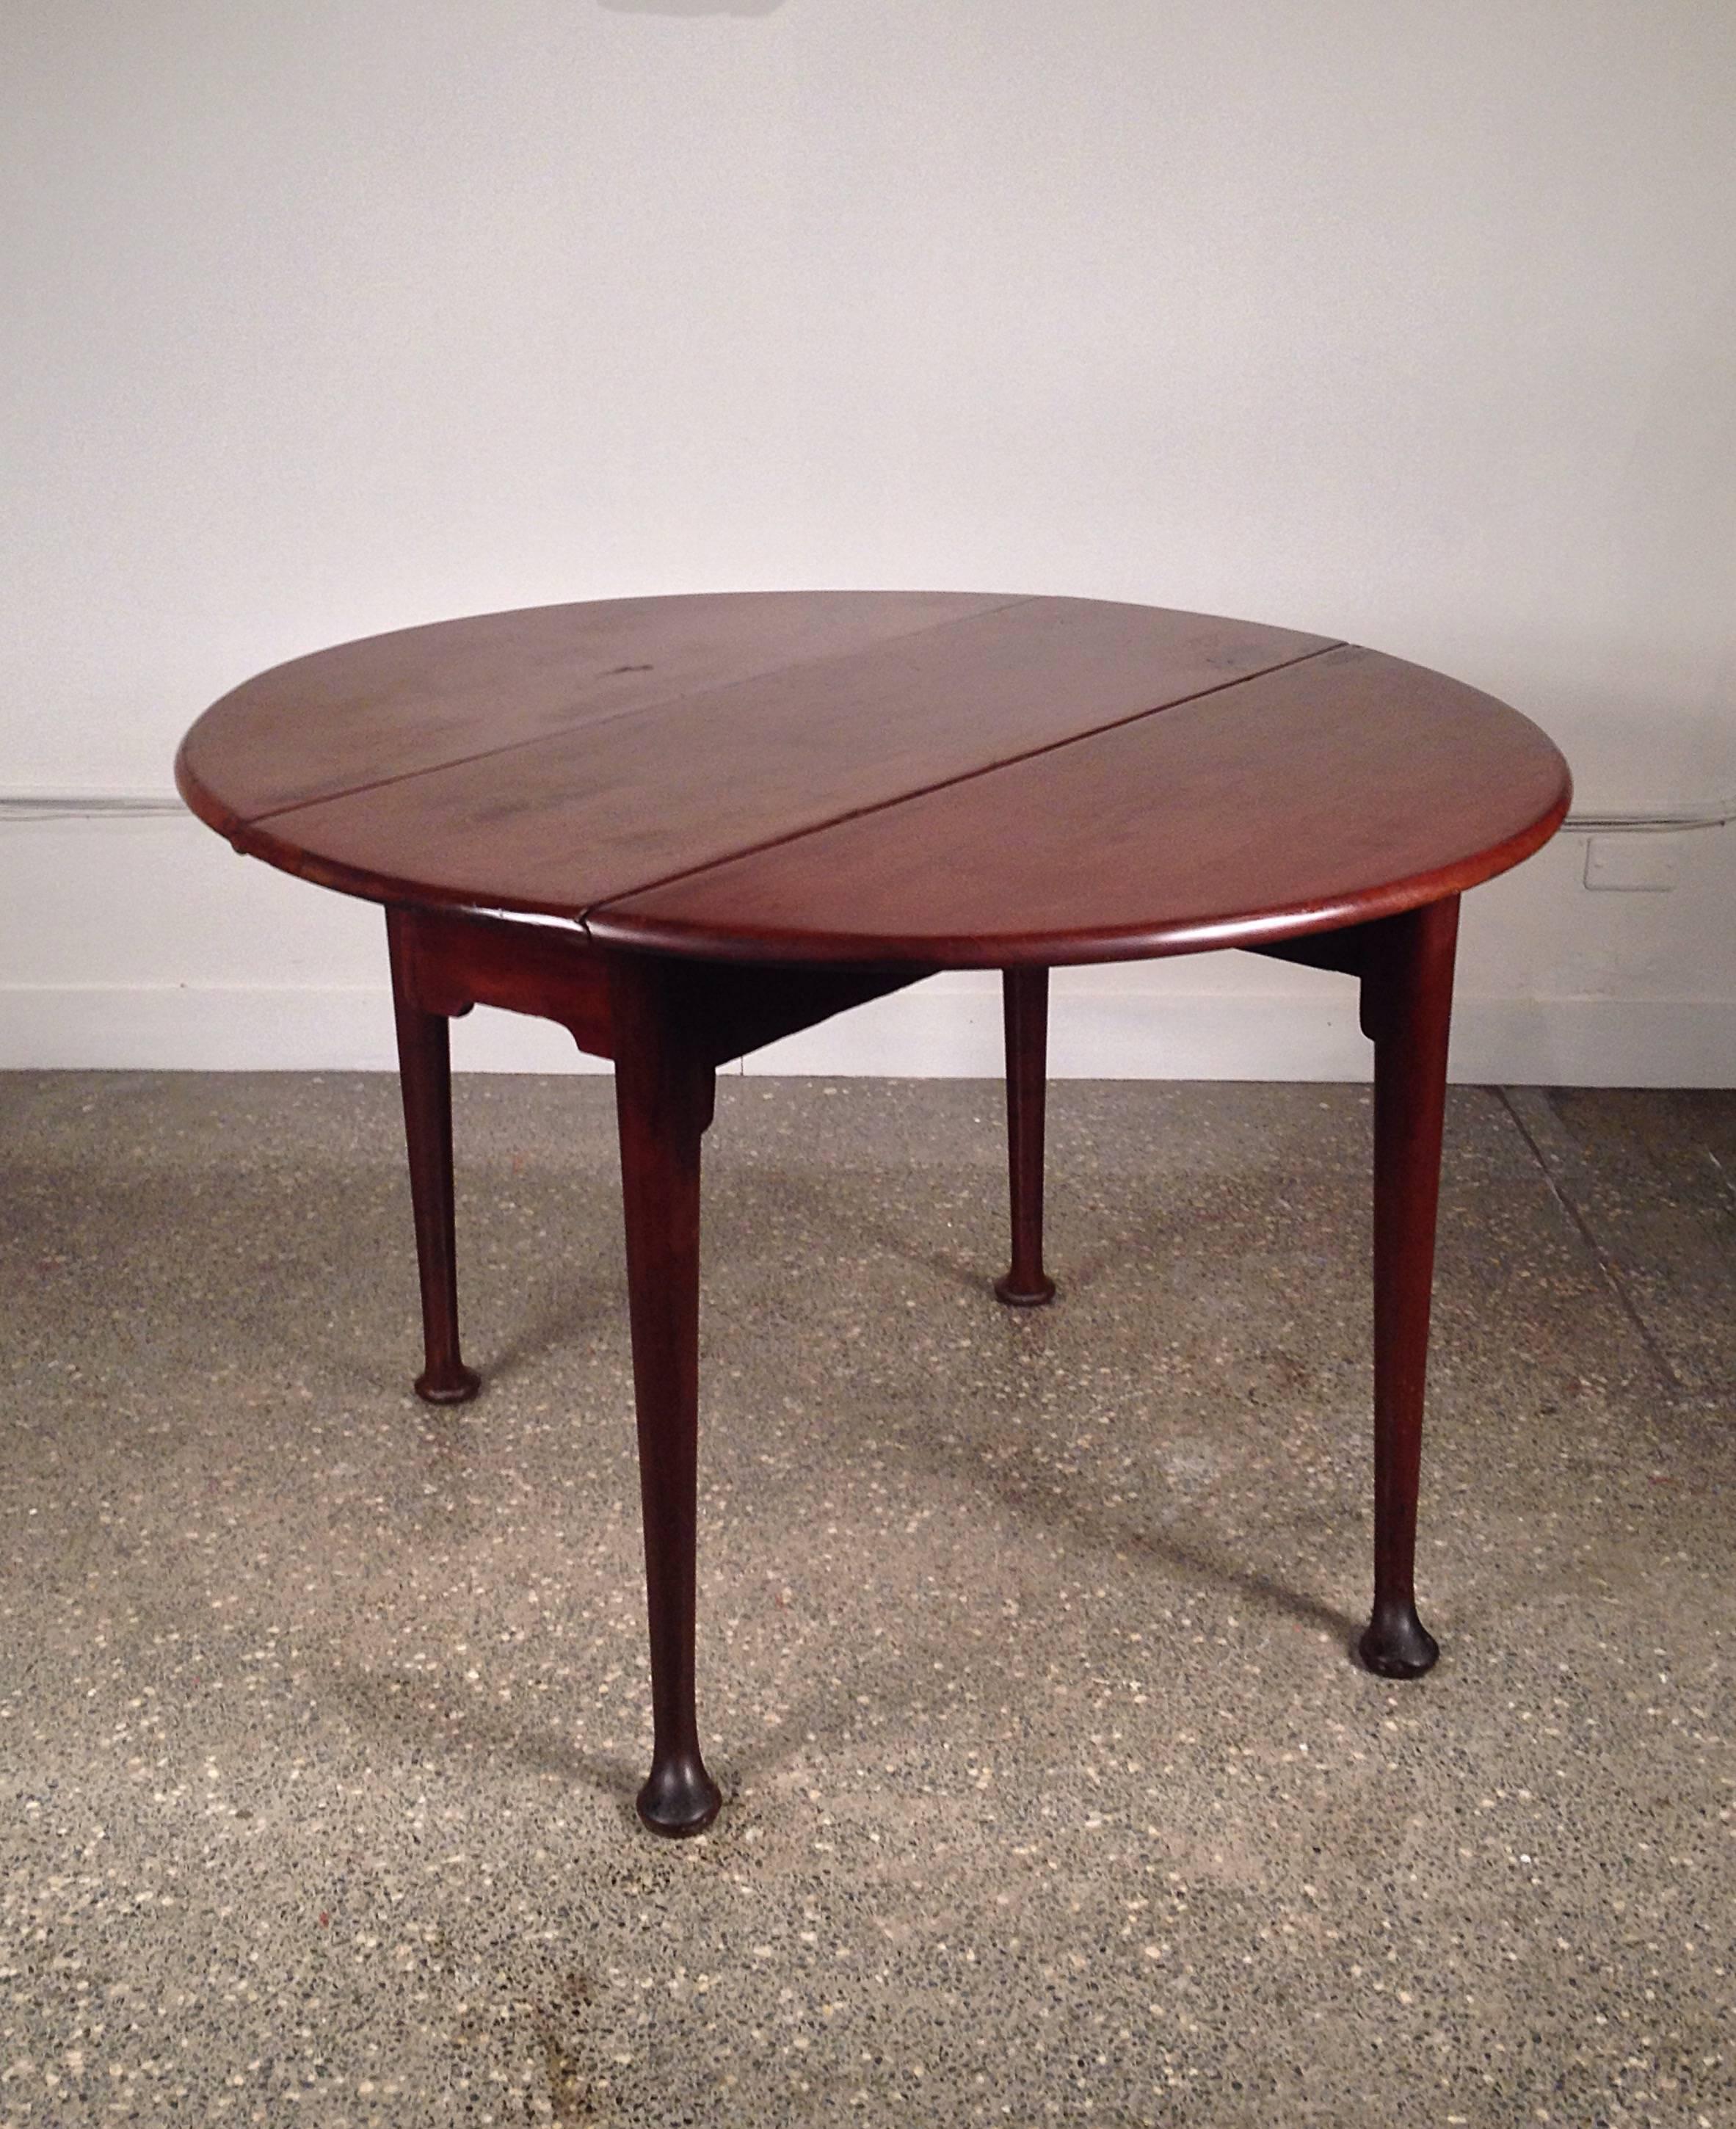 A round mahogany George II drop-leaf breakfast table with beautiful proportions, raised on swing tapered legs and pad feet. 
The table is 14.5